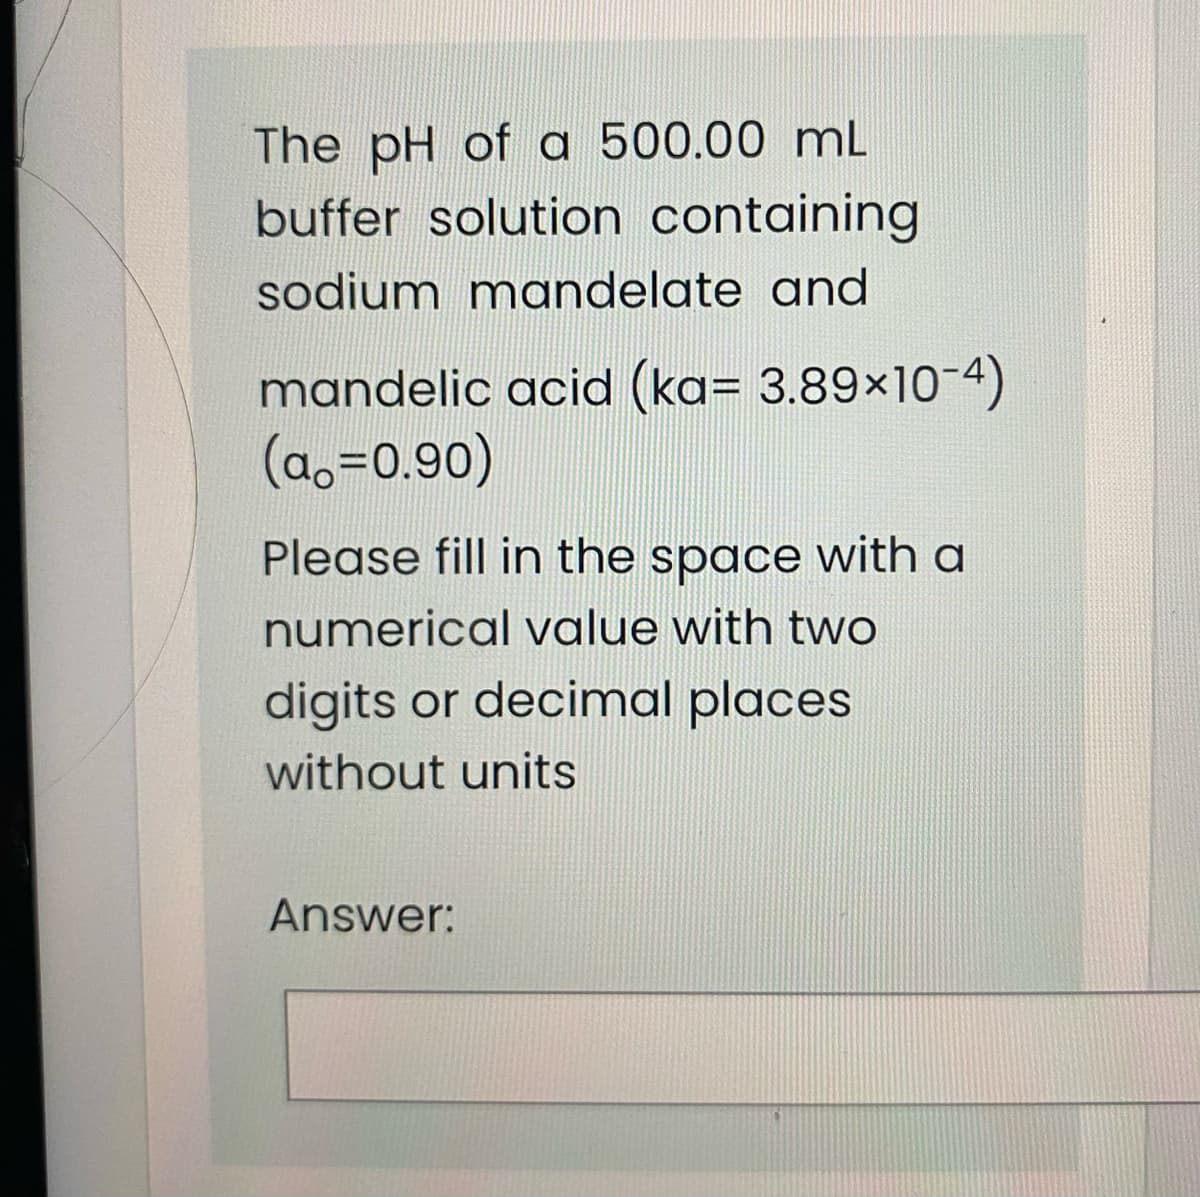 The pH of a 500.00 mL
buffer solution containing
sodium mandelate and
mandelic acid (ka= 3.89×10-4)
(ao=0.90)
Please fill in the space with a
numerical value with two
digits or decimal places
without units
Answer:
